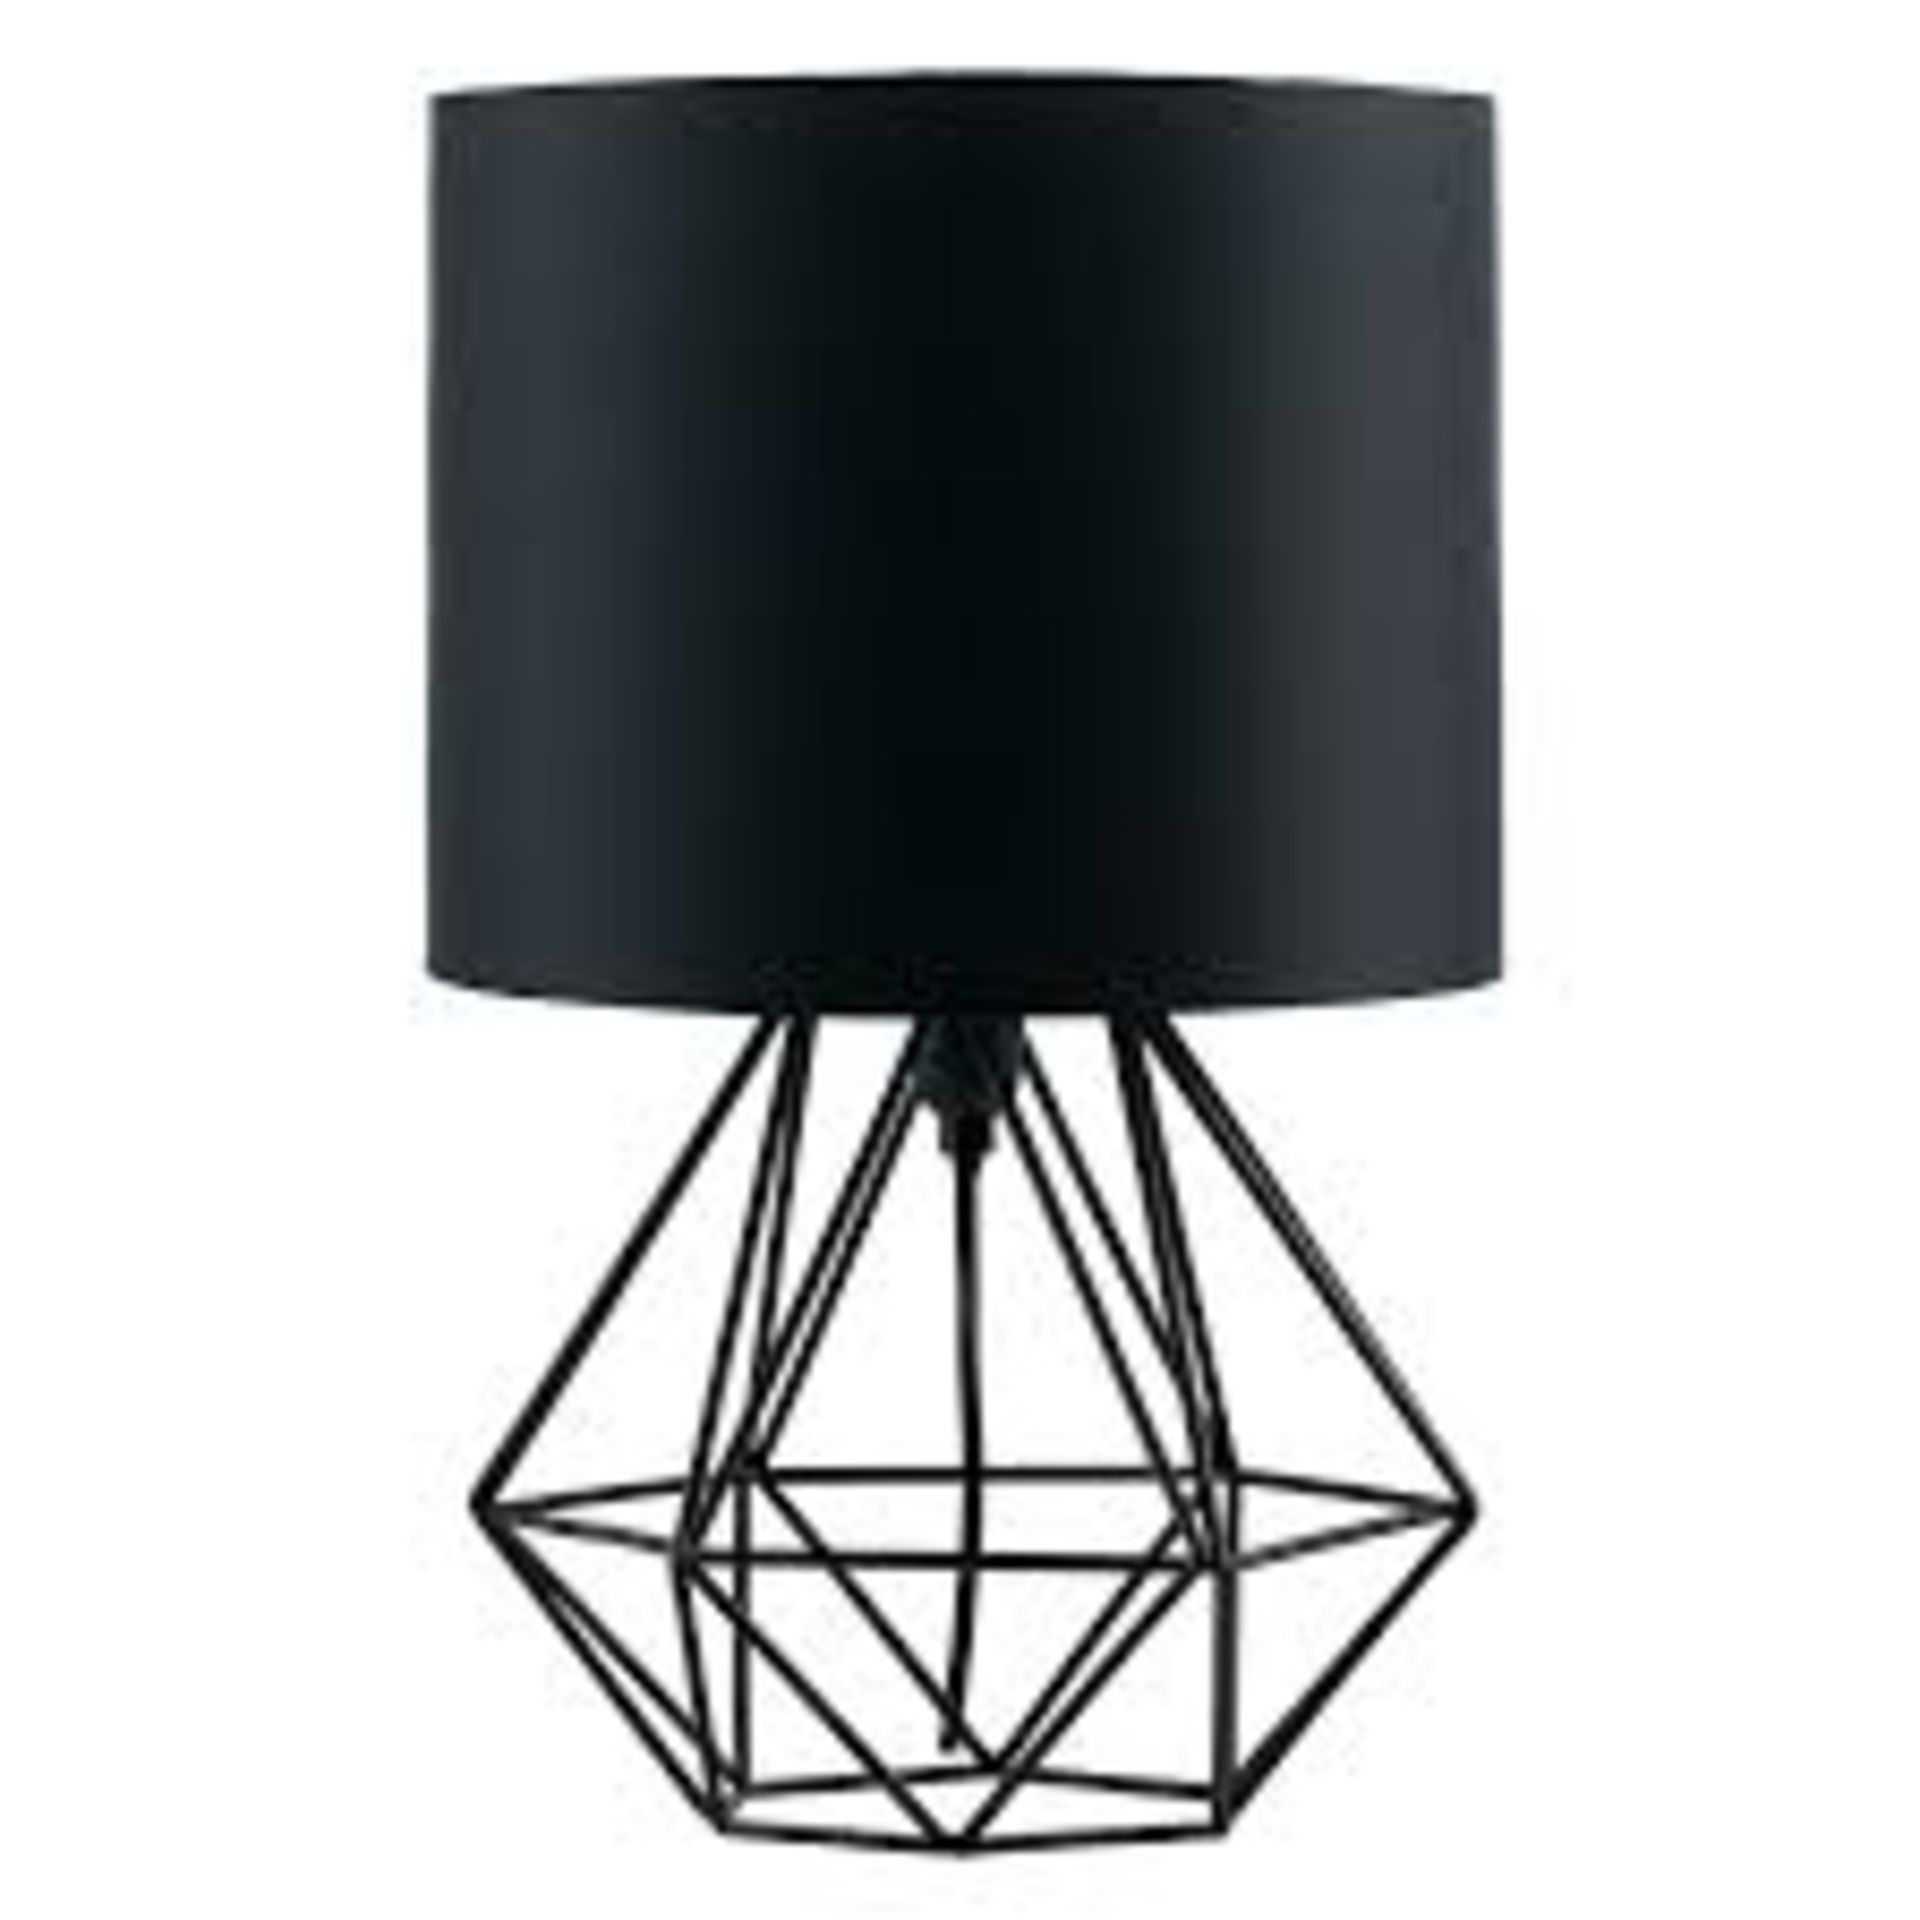 Lot To Contain Two Minisun Angus Geometric Satin Black Table Lamps Combined RRP £80 (17105) (10.01.